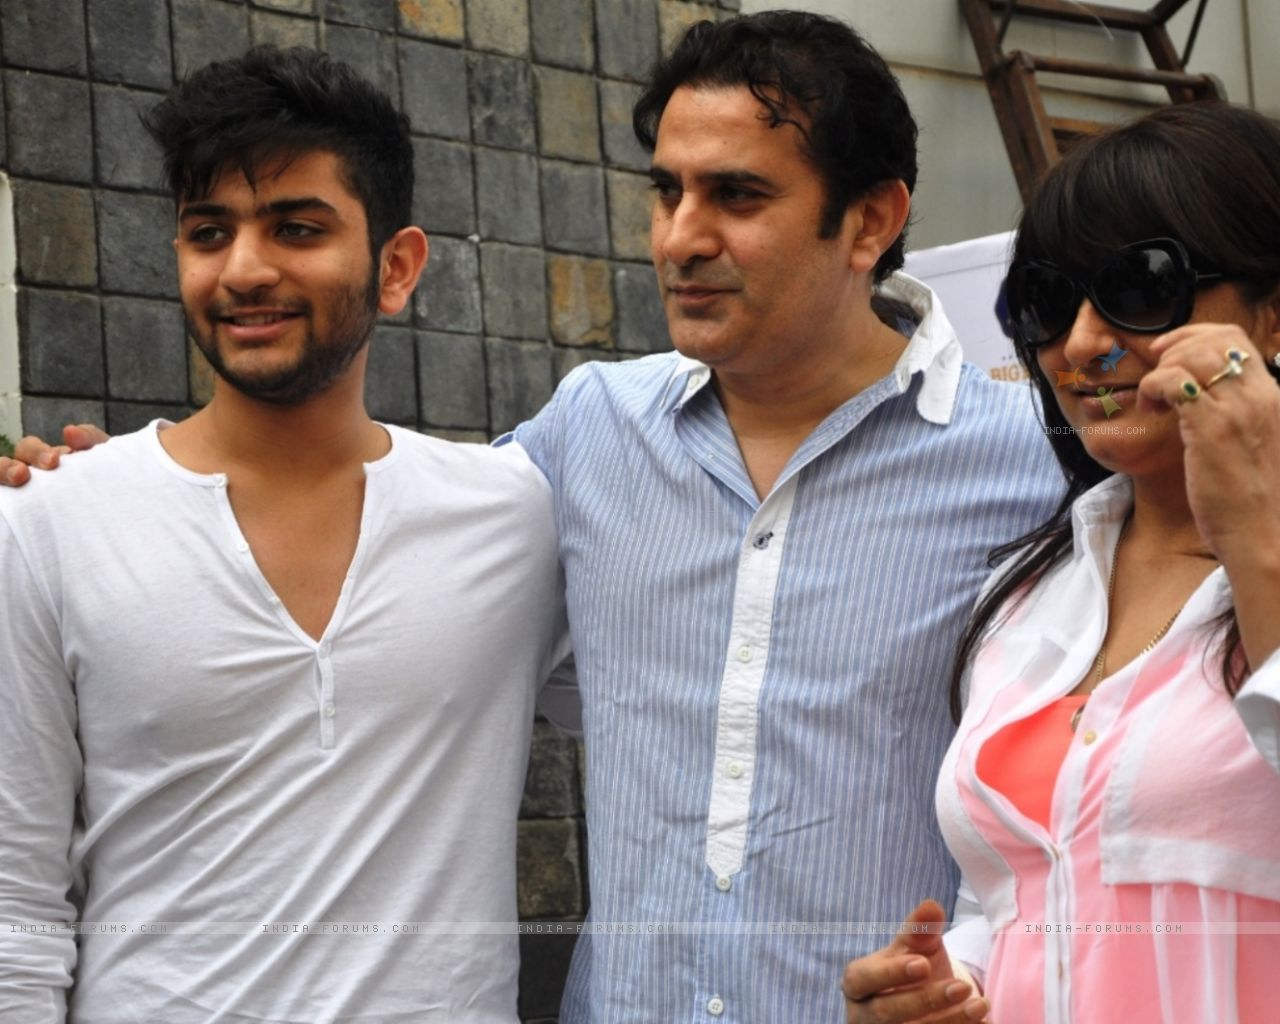 Parmeet Sethi With His Family